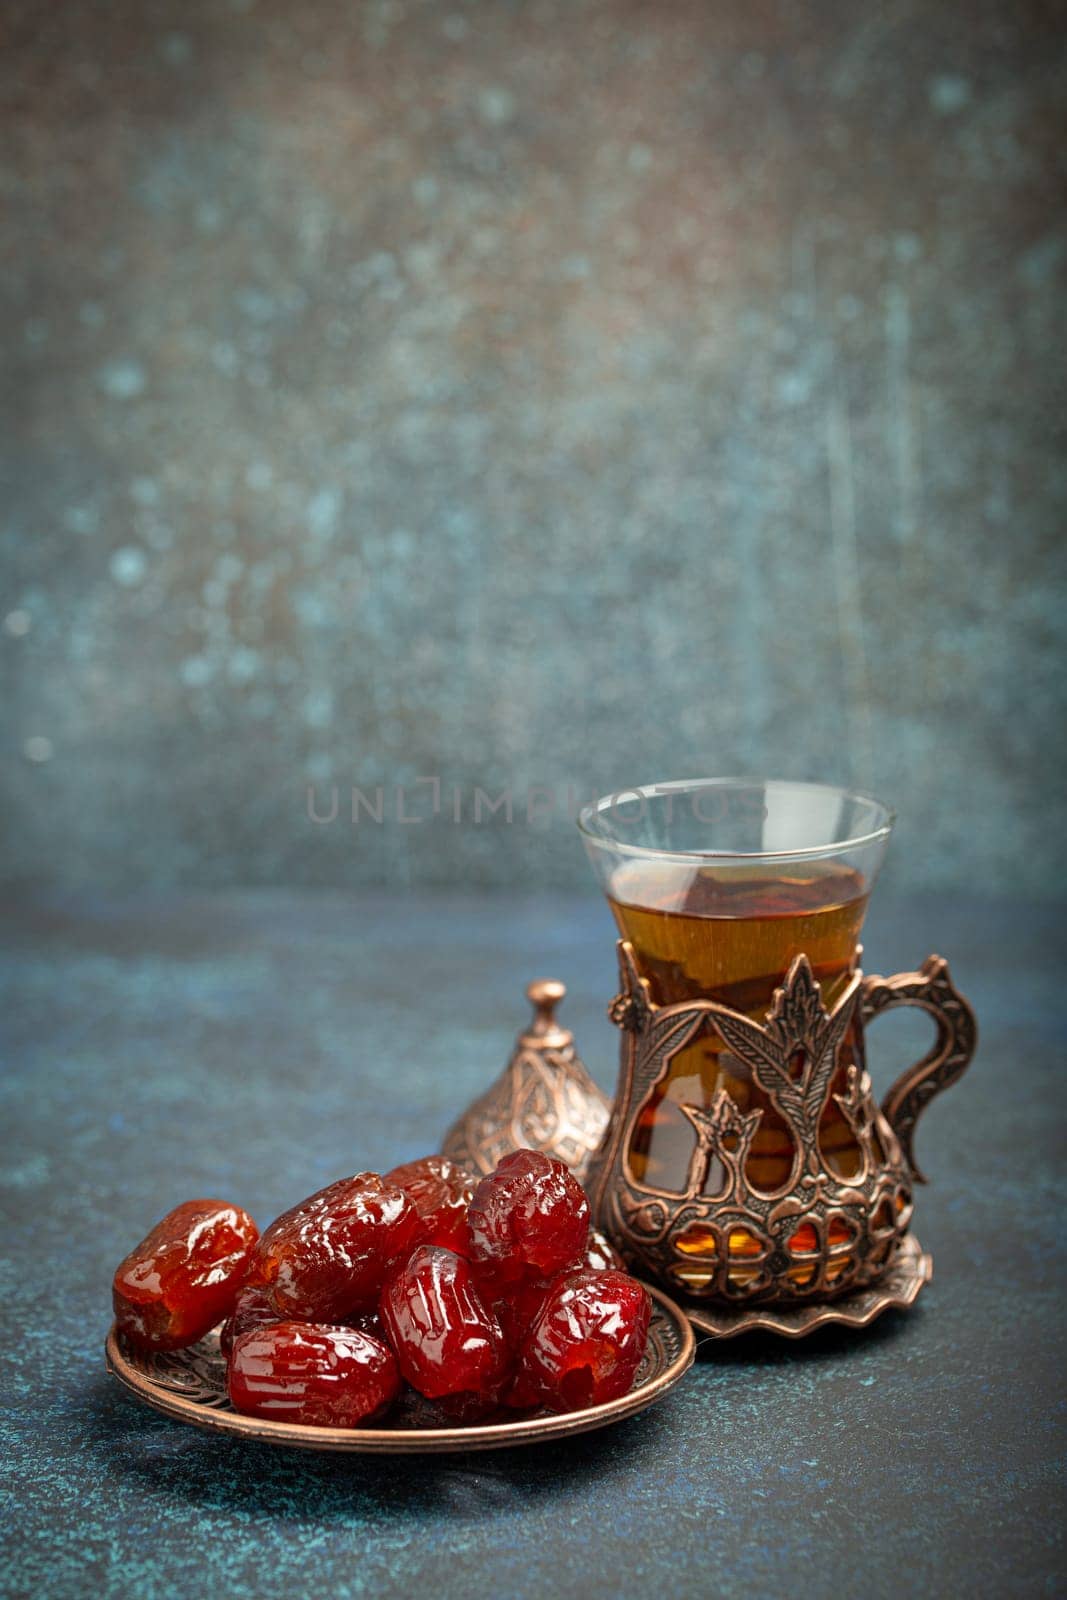 Breaking fasting with dried dates during Ramadan Kareem, Iftar meal with dates and Arab tea in traditional glass, angle view on rustic blue background. Muslim feast by its_al_dente